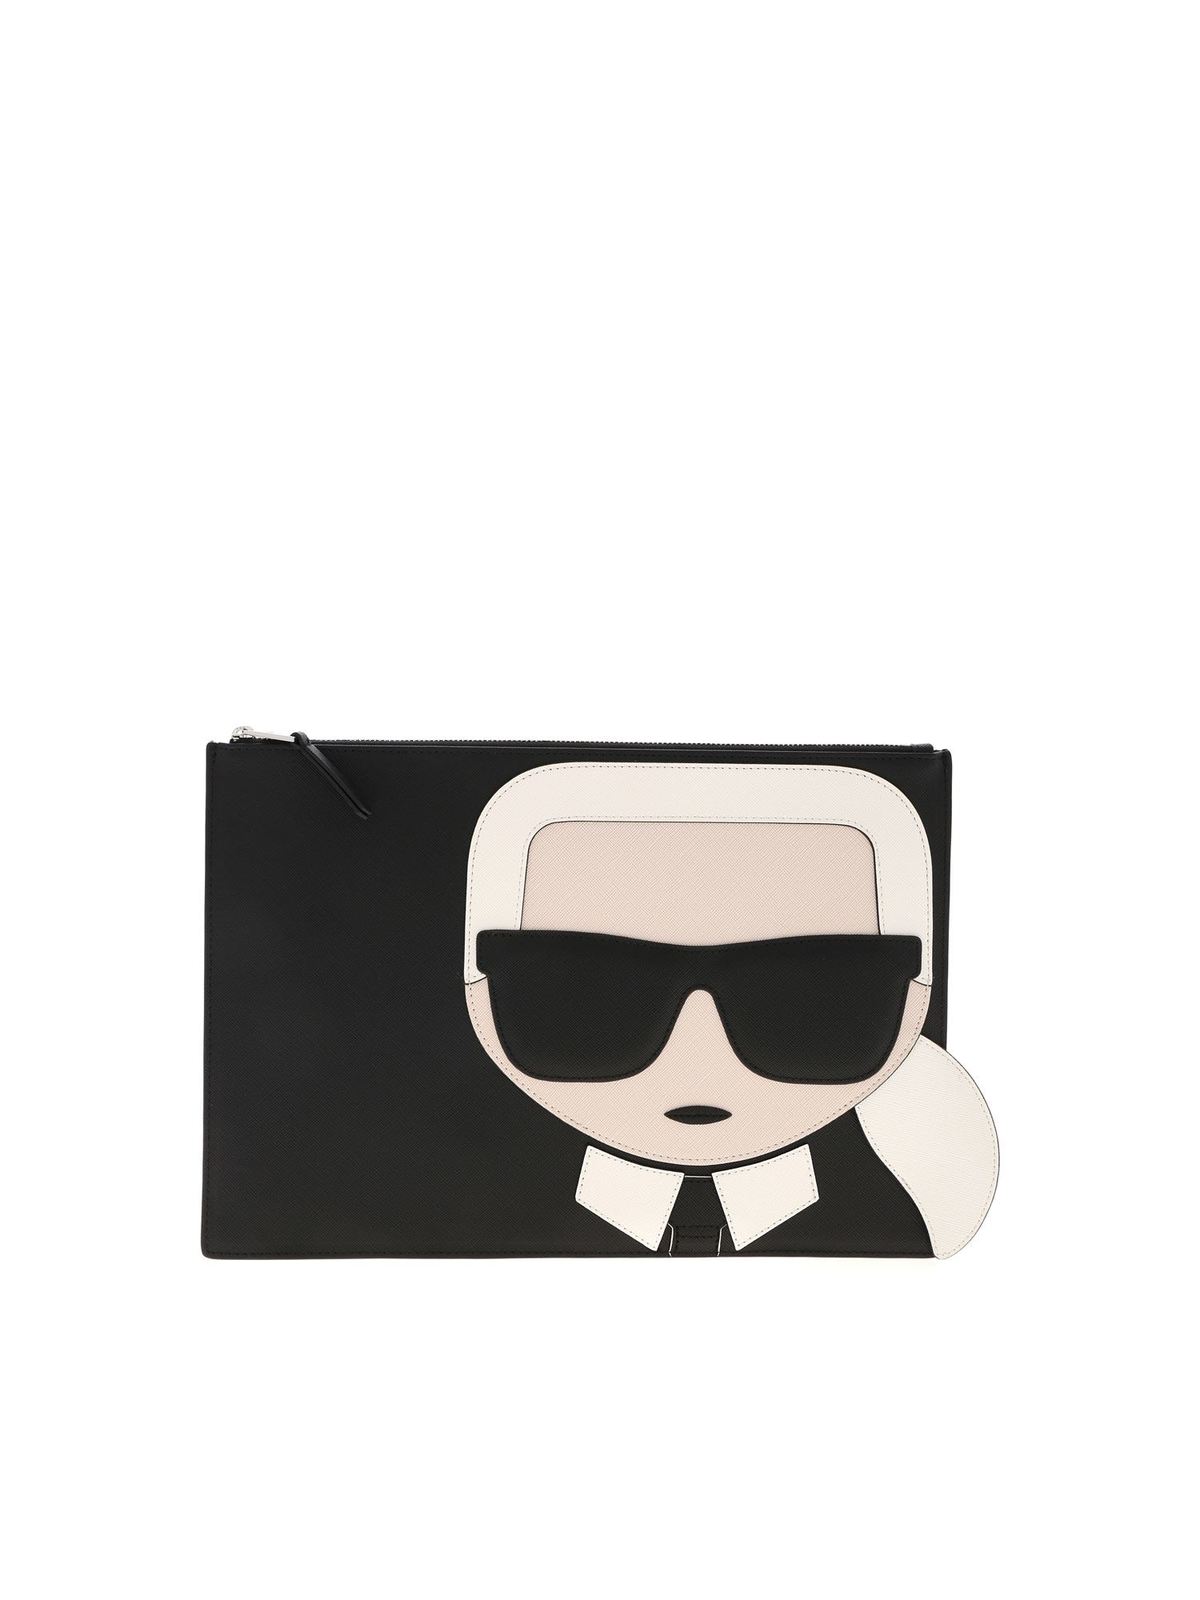 100% Authentic Karl Lagerfeld Laptop Sleeve Clutch, Luxury, Bags & Wallets  on Carousell